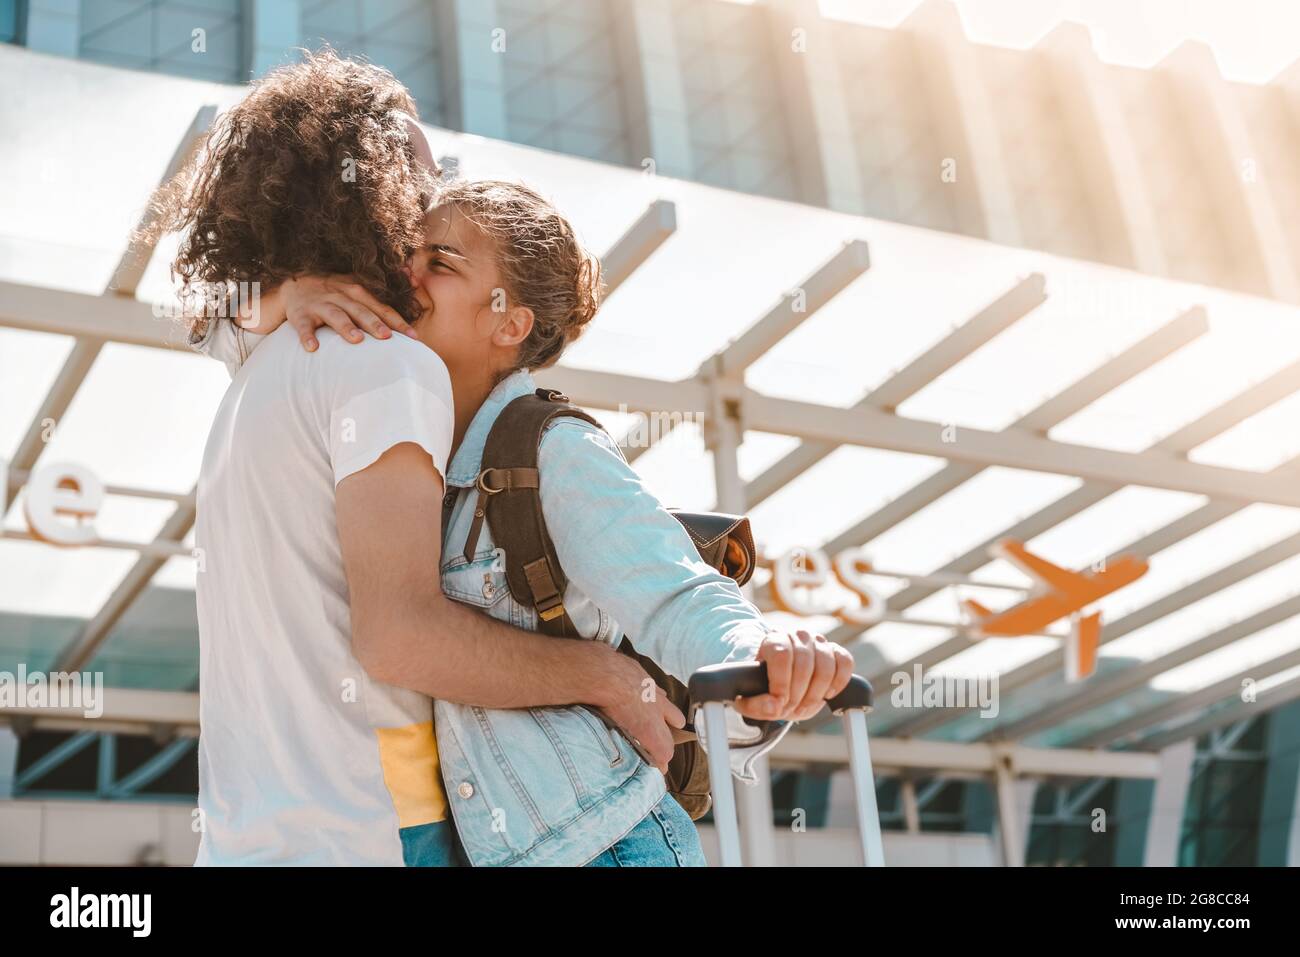 https://c8.alamy.com/comp/2G8CC84/young-international-couple-meeting-at-airport-departures-area-with-luggage-happy-hugging-each-other-saying-good-bye-before-vacation-or-business-trip-2G8CC84.jpg